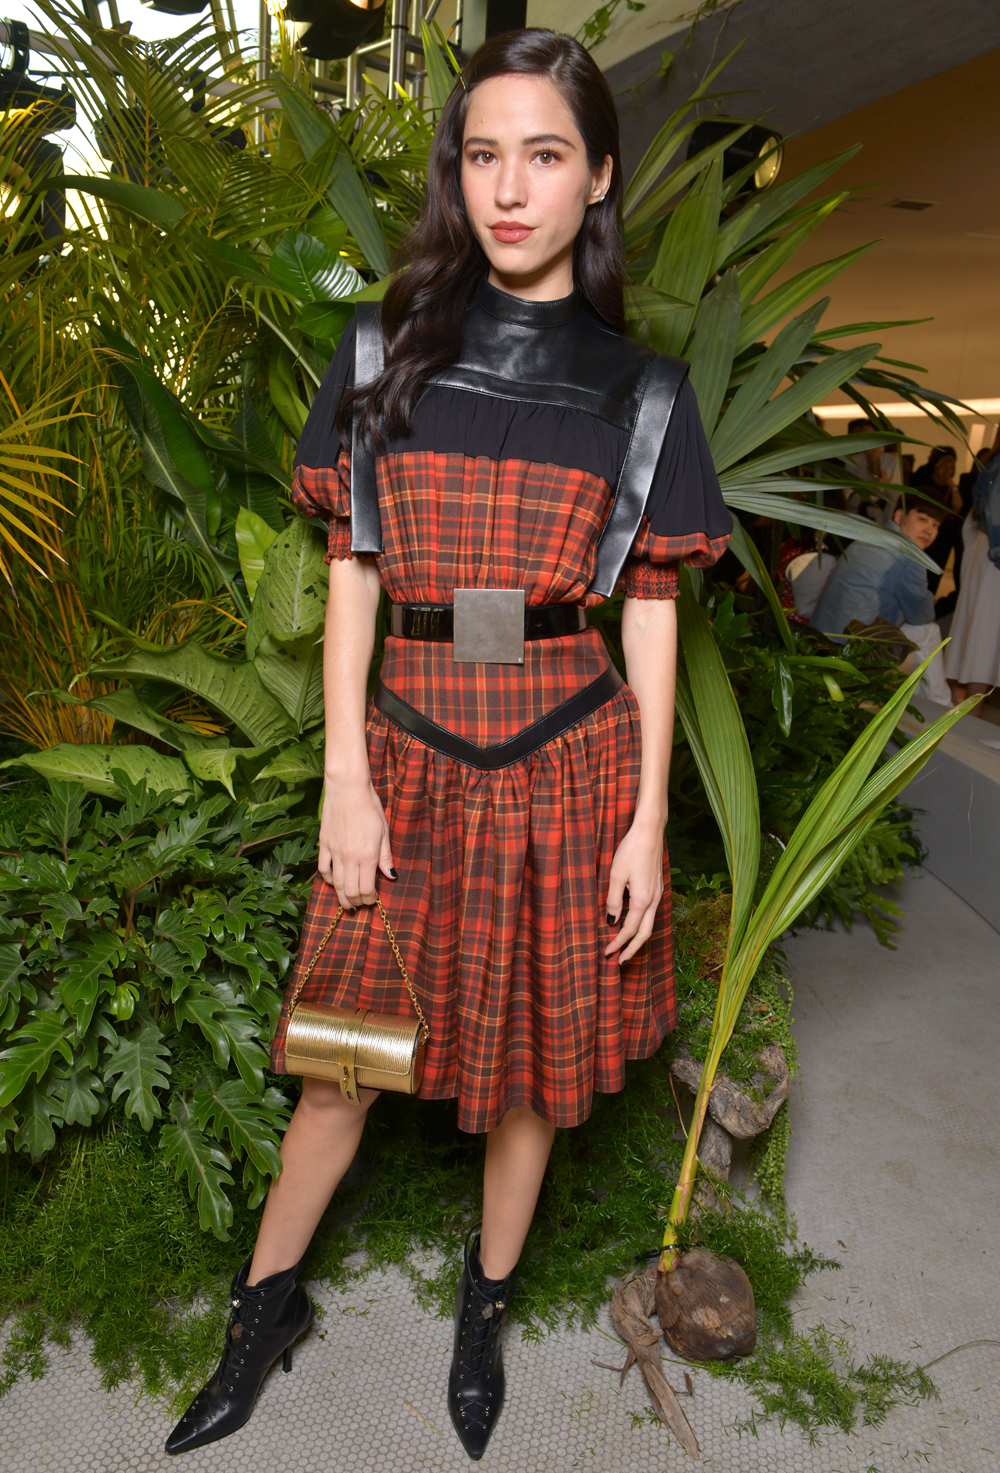 Alicia Vikander Louis Vuitton Cruise 2020 Spin-Off Show October 31, 2019 –  Star Style